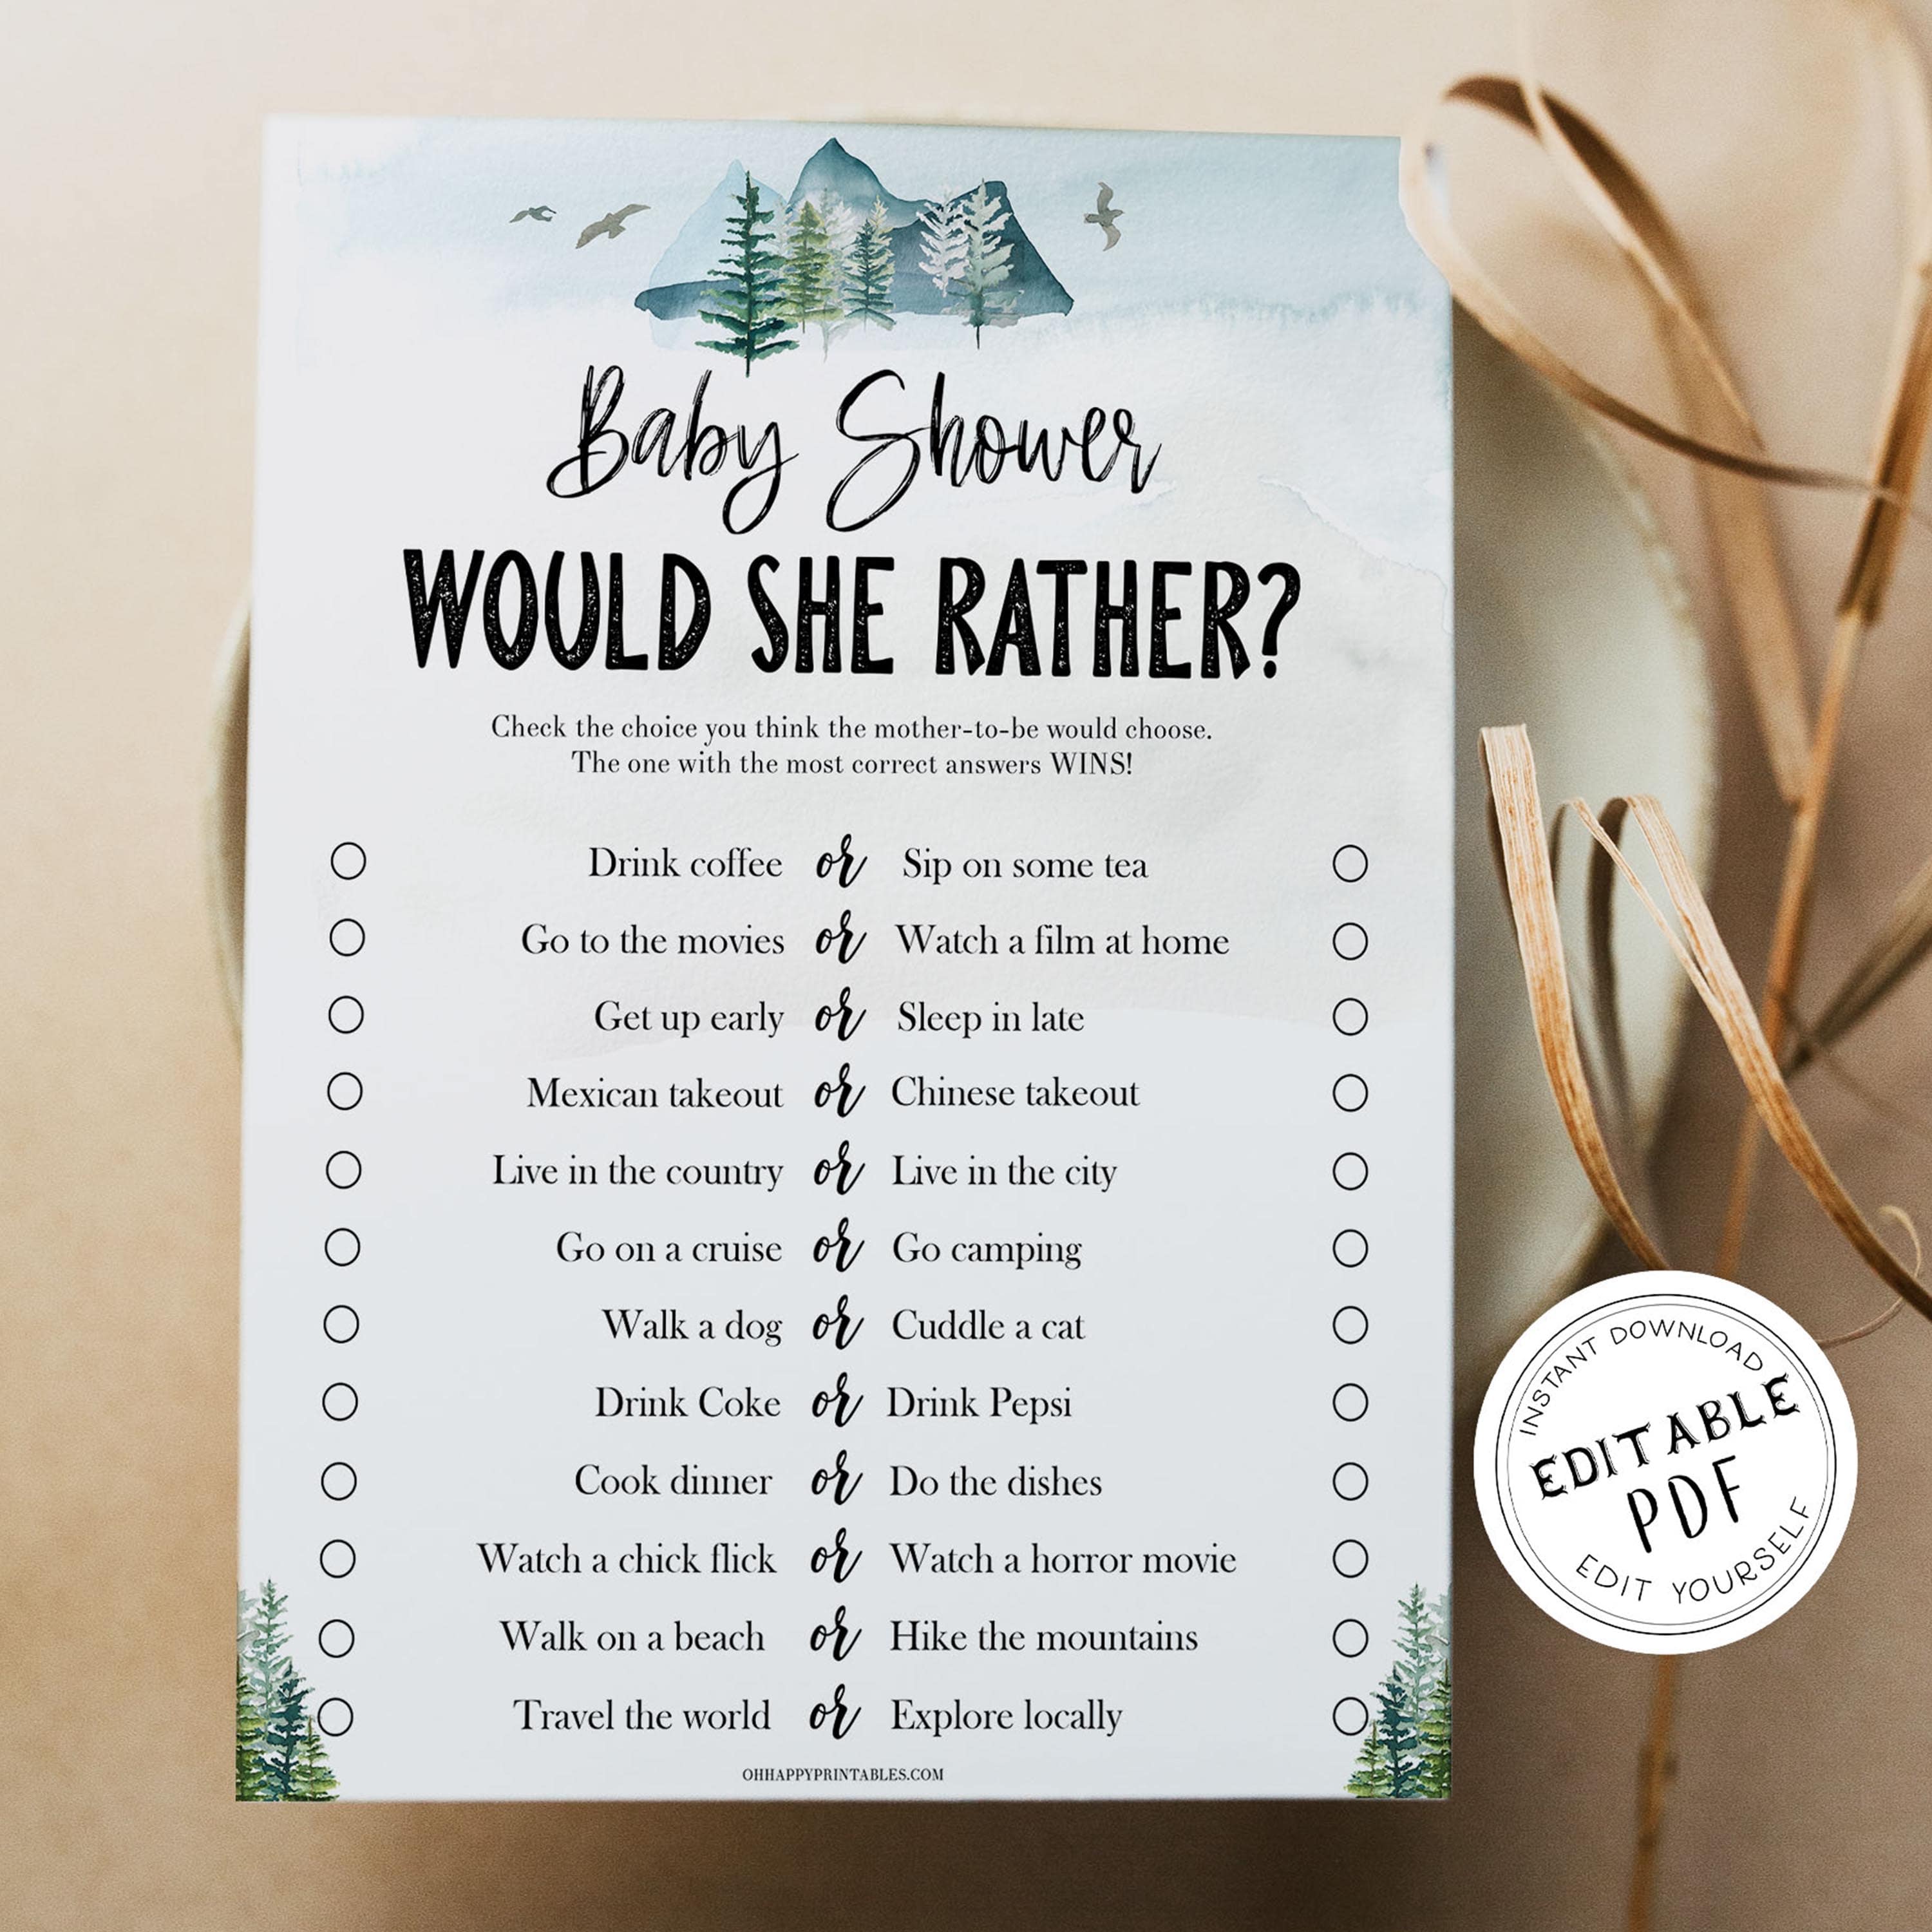 editable would she rather baby game, Printable baby shower games, adventure awaits baby games, baby shower games, fun baby shower ideas, top baby shower ideas, adventure awaits baby shower, baby shower games, fun adventure baby shower ideas